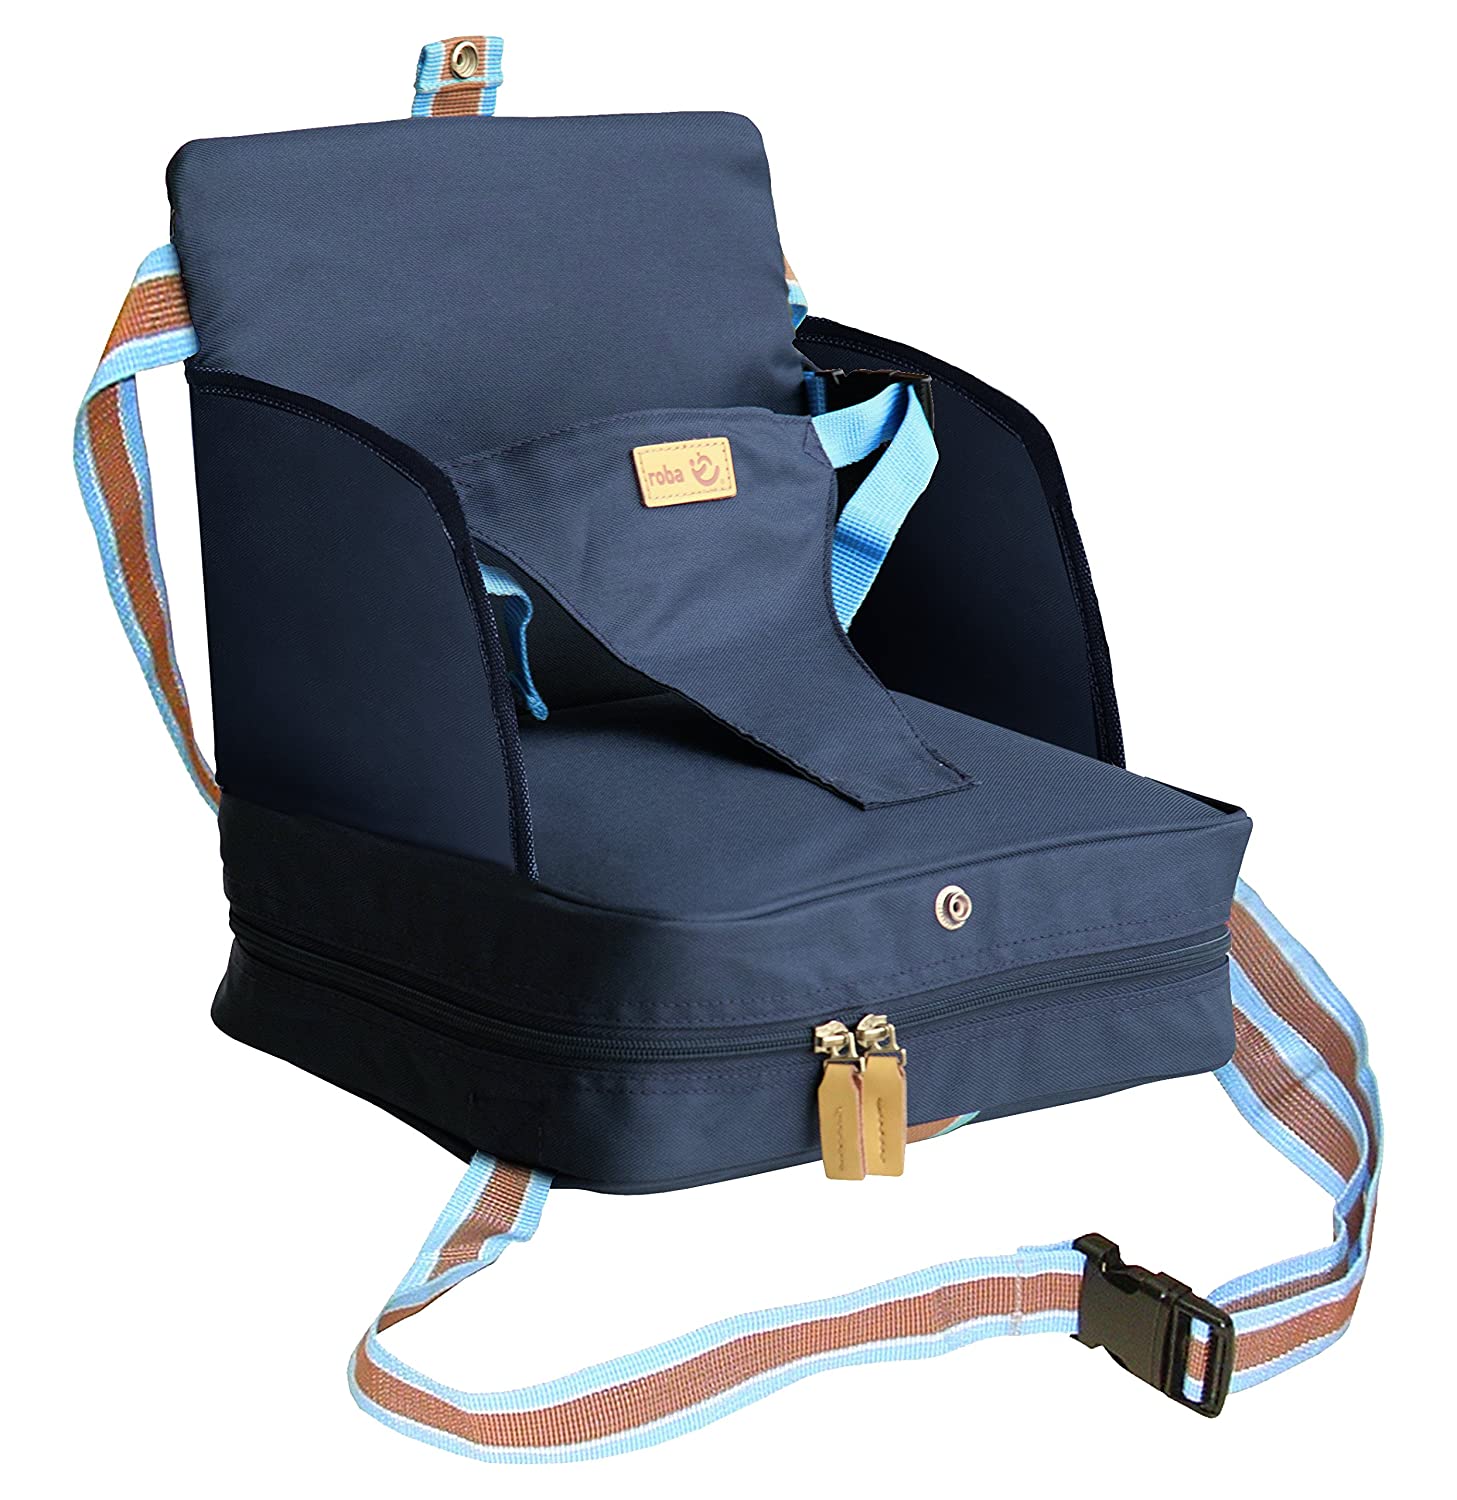 Roba Booster Seat - Mobile Inflatable Child Seat / Booster Seat - Practical for Travelling New Version